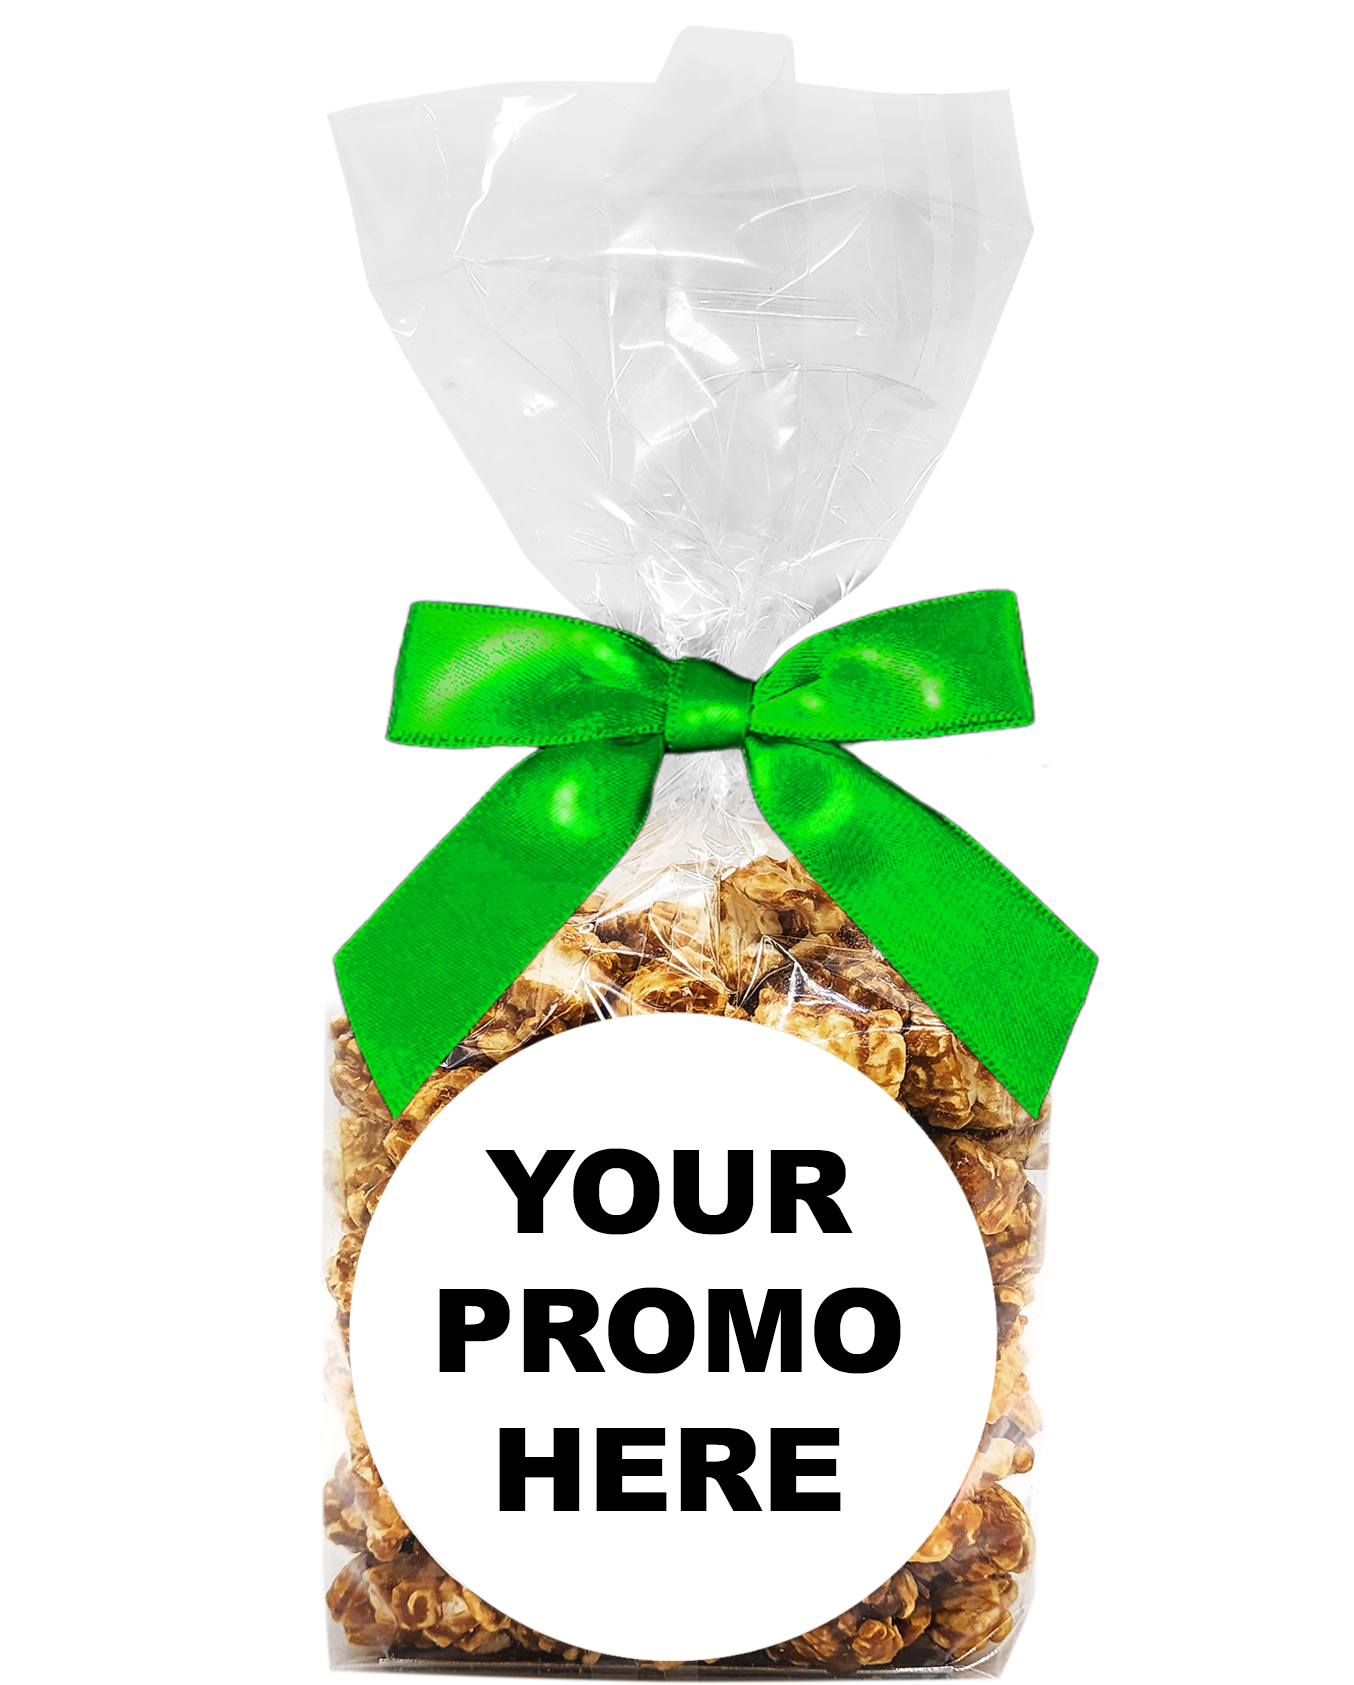 Kettle Clouds™ - Caramel Corn Bags & Bows (as low as $4.49 per bag) Case of 12 Price